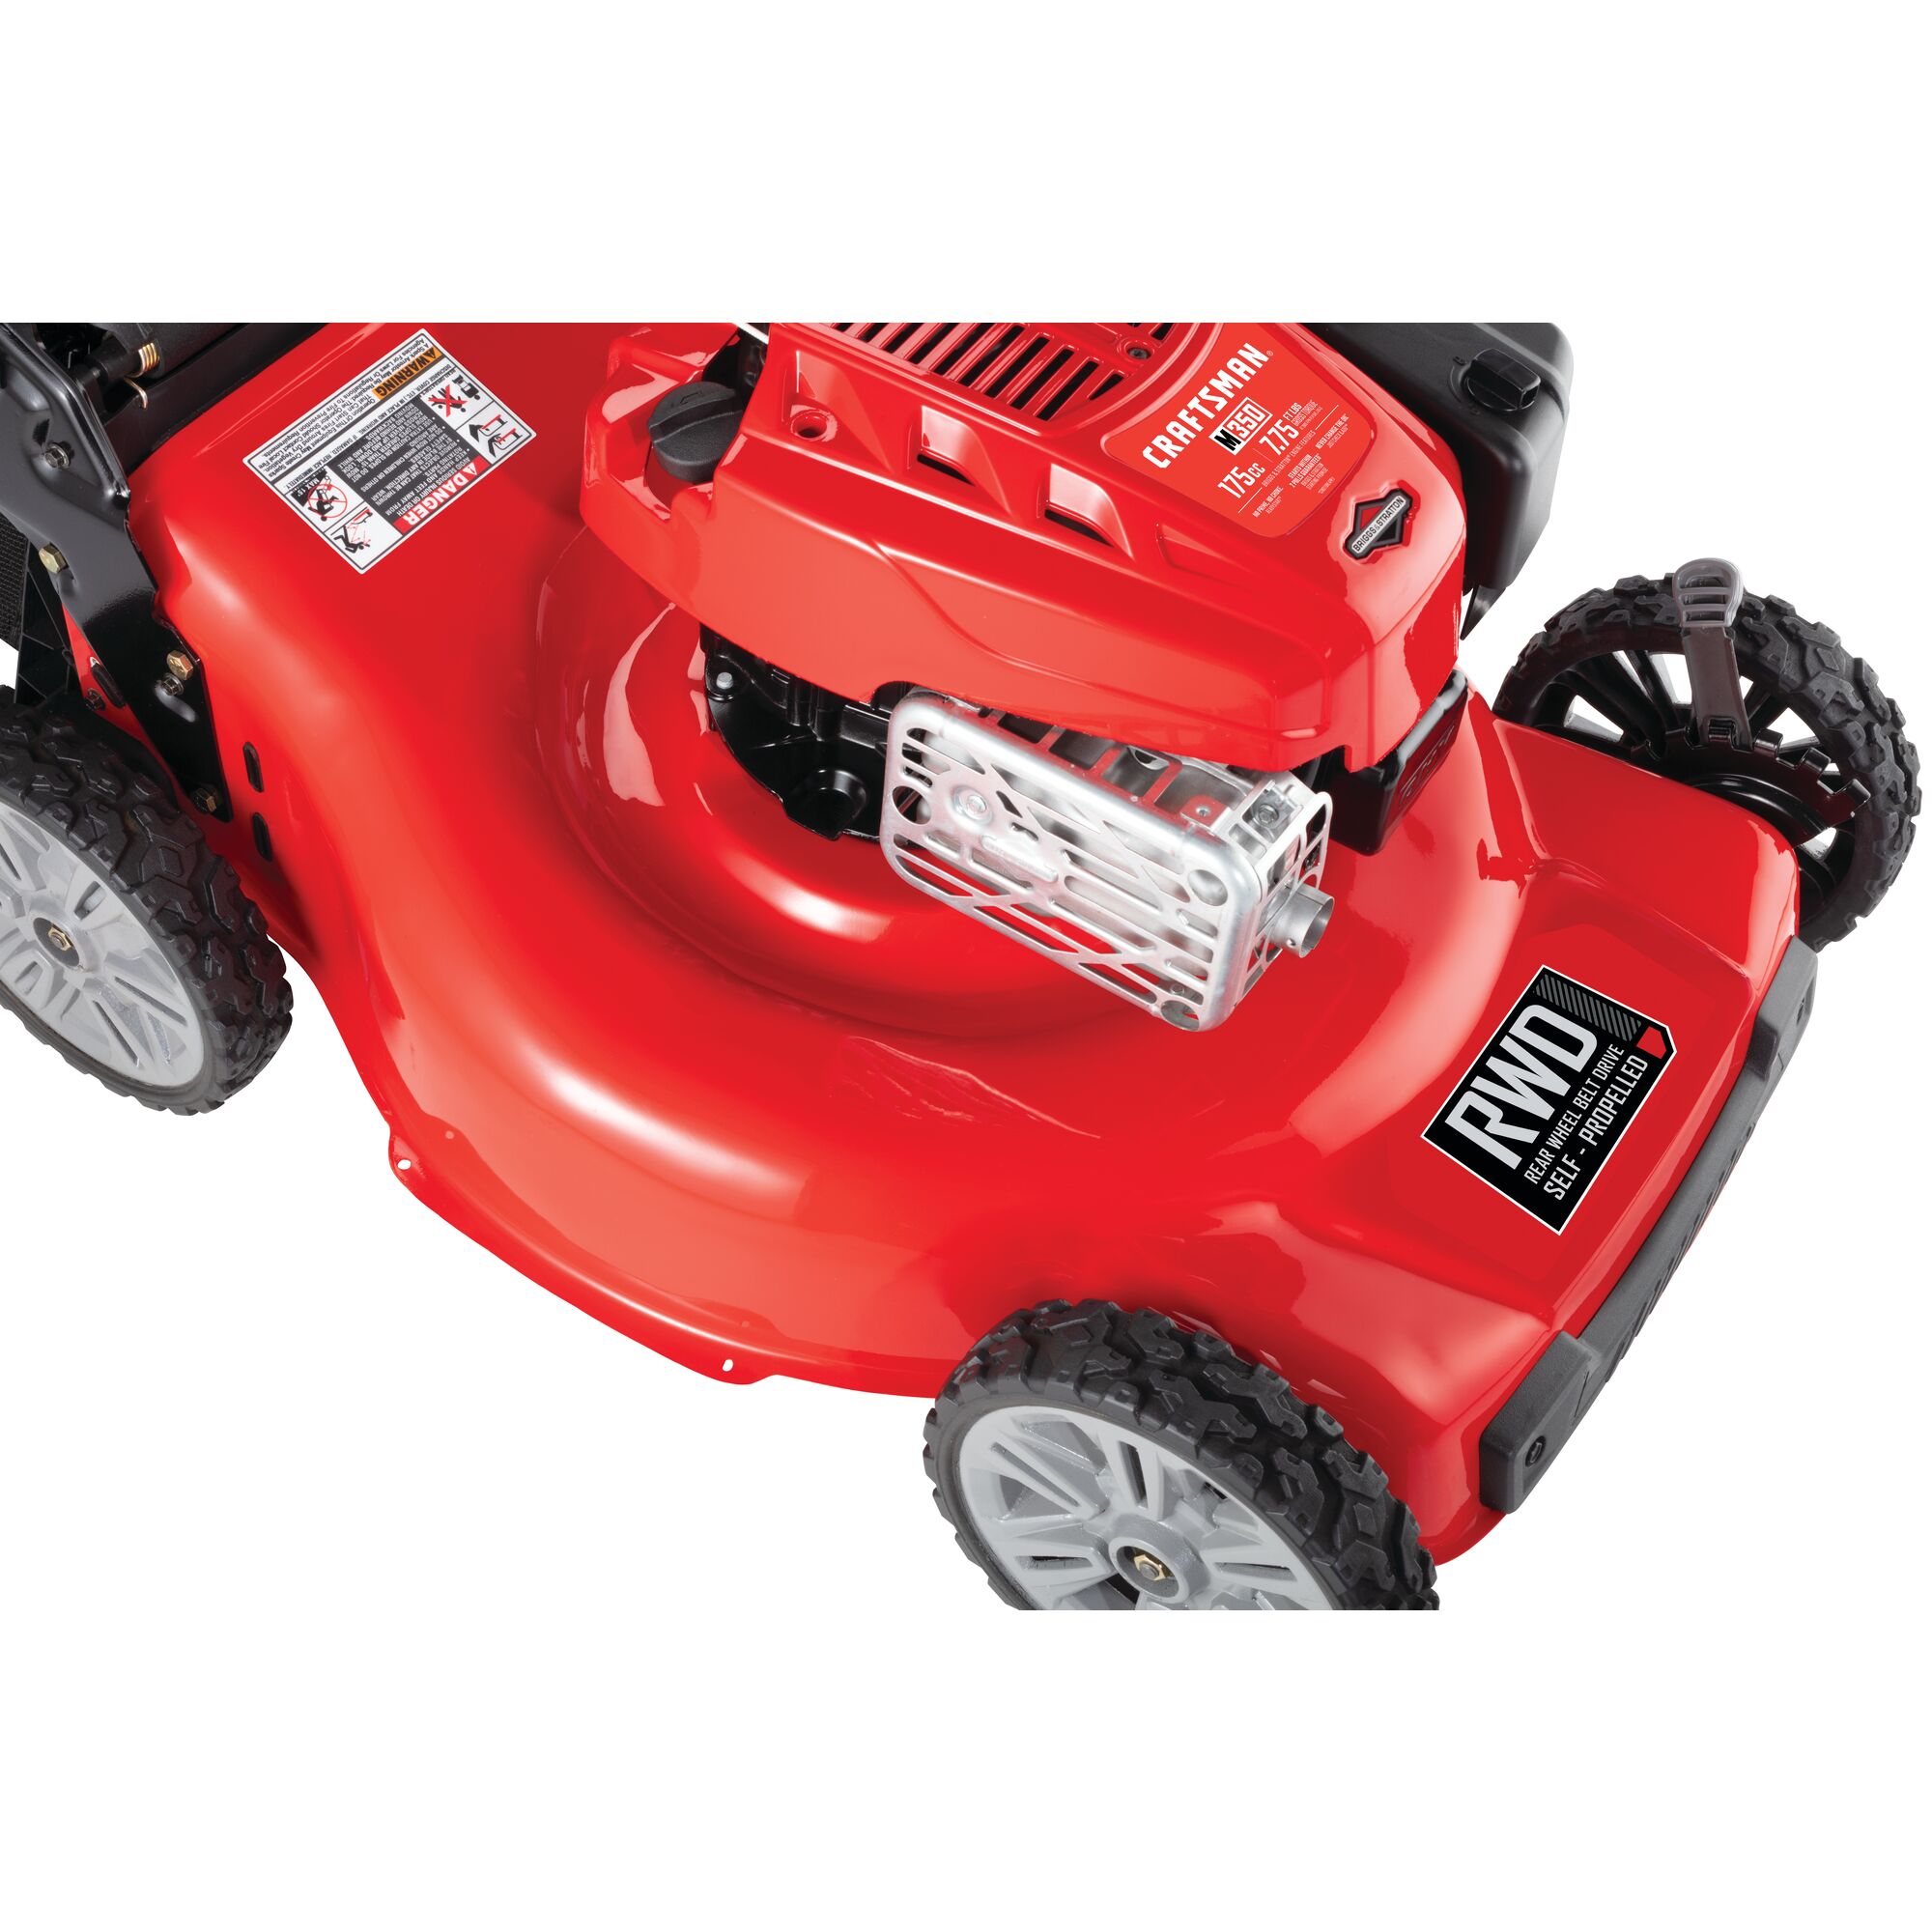 Powerful motor feature of 23 inch 175 c c r w d self propelled mower.